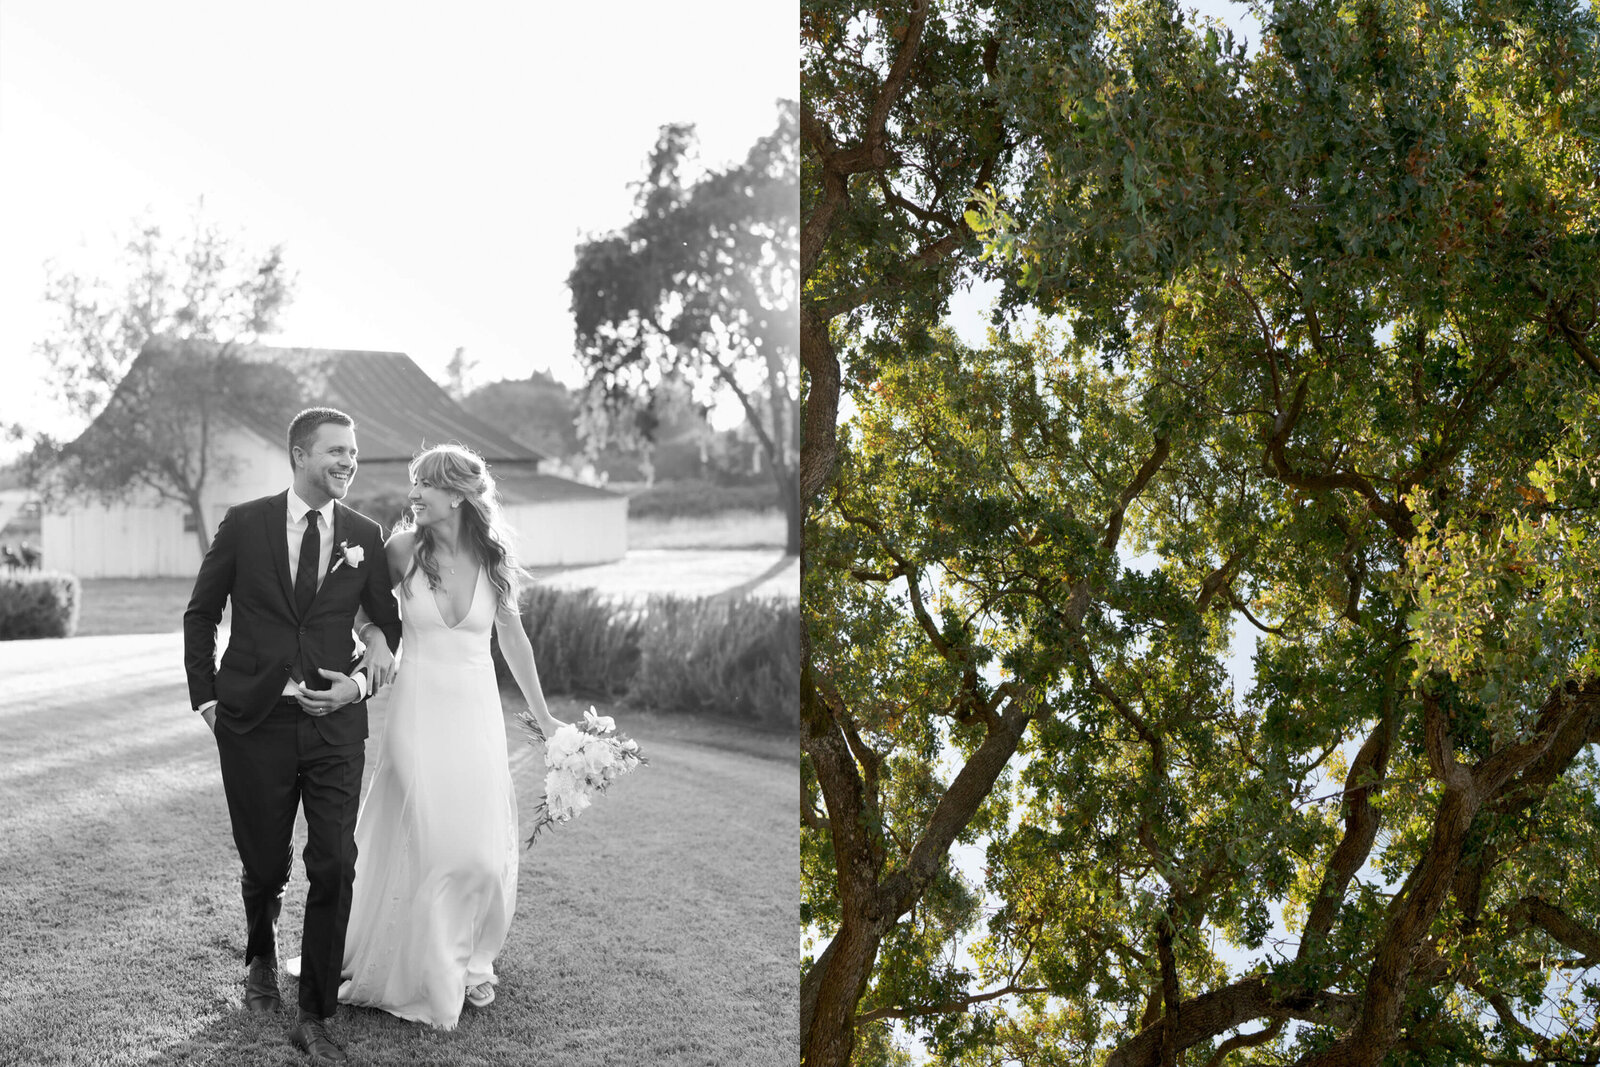 Courtyard wedding and sky up click of tree crowns.